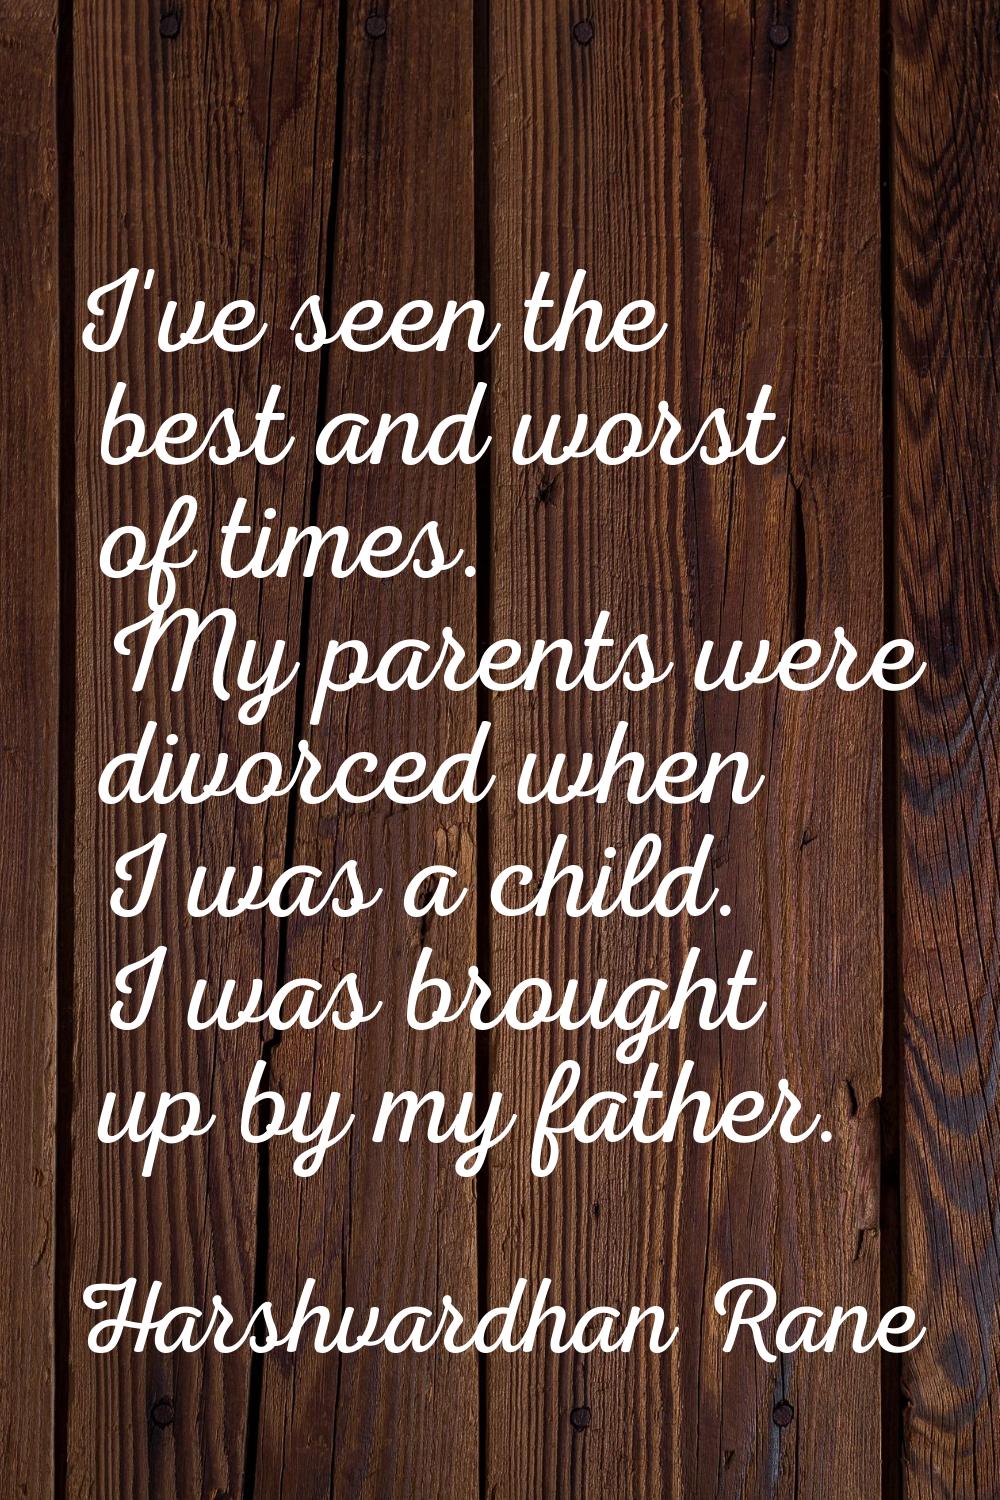 I've seen the best and worst of times. My parents were divorced when I was a child. I was brought u